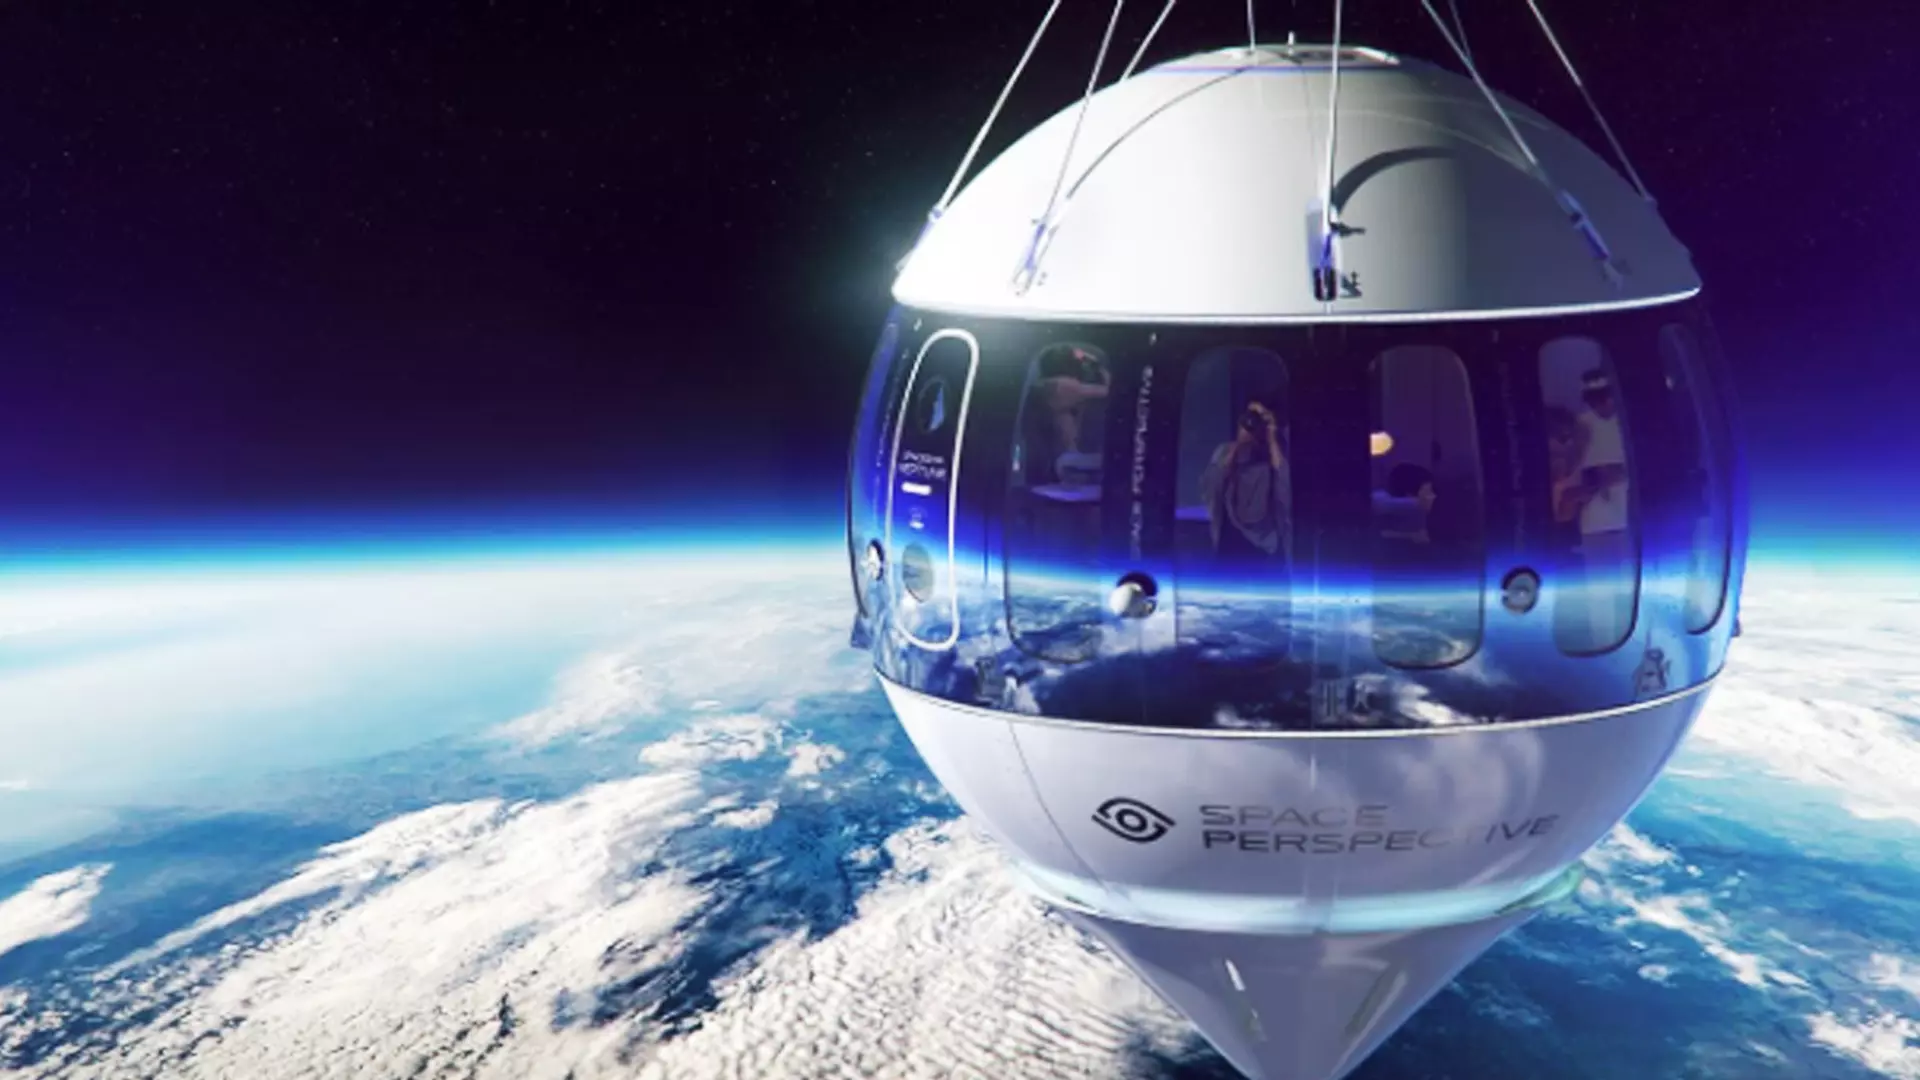 SpaceVIP, a luxury space travel company, will take six p eople on this spacecraft and serve them a meal made by a Michelin-starred chef. Pic: joinspacevip|Instagram